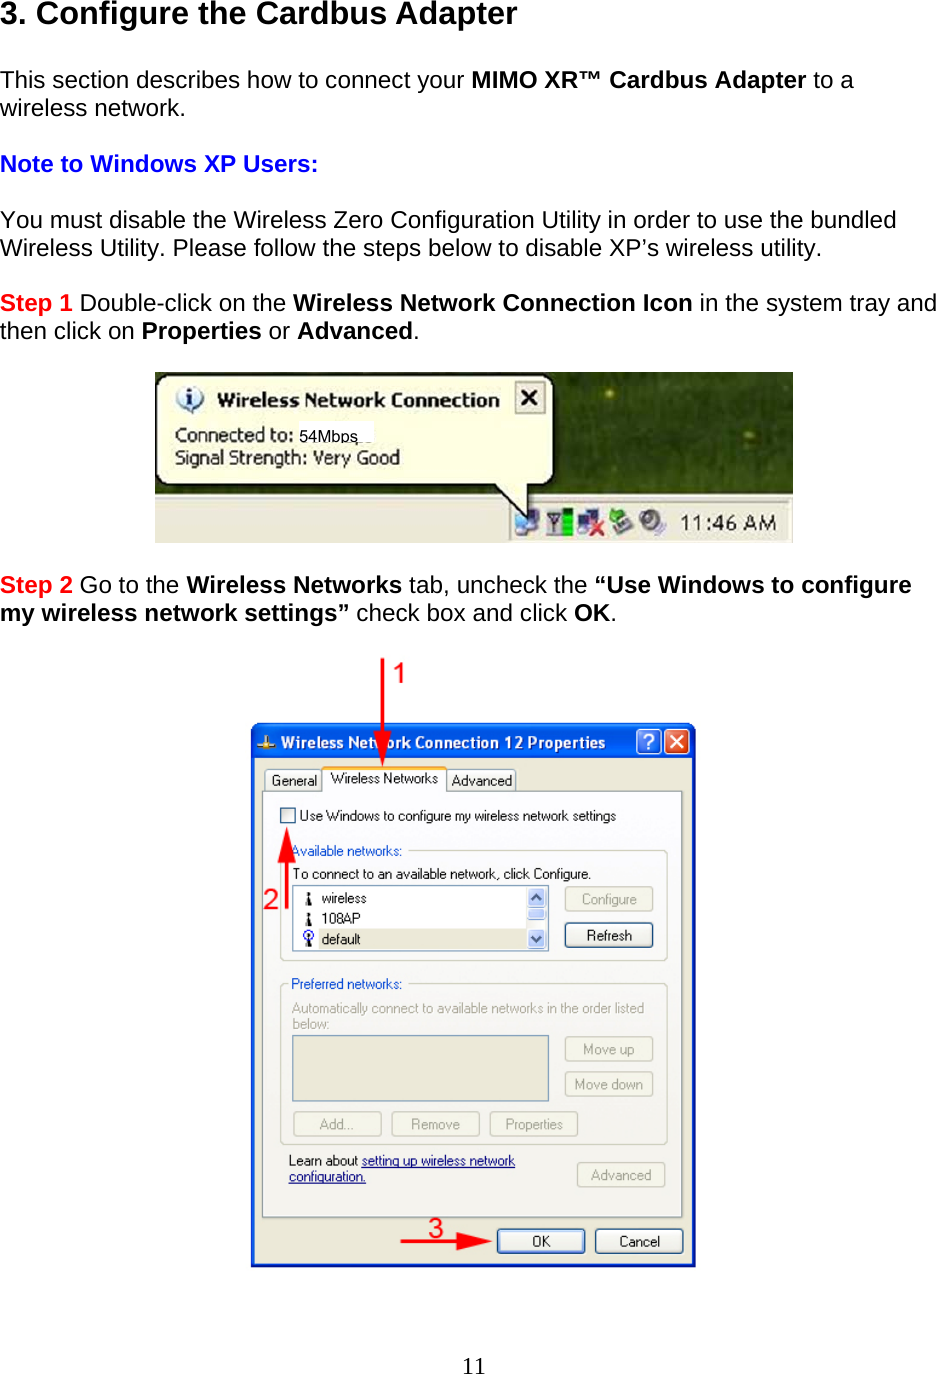 11 3. Configure the Cardbus Adapter  This section describes how to connect your MIMO XR™ Cardbus Adapter to a wireless network.  Note to Windows XP Users:  You must disable the Wireless Zero Configuration Utility in order to use the bundled Wireless Utility. Please follow the steps below to disable XP’s wireless utility.  Step 1 Double-click on the Wireless Network Connection Icon in the system tray and then click on Properties or Advanced.    Step 2 Go to the Wireless Networks tab, uncheck the “Use Windows to configure my wireless network settings” check box and click OK.    54Mbps